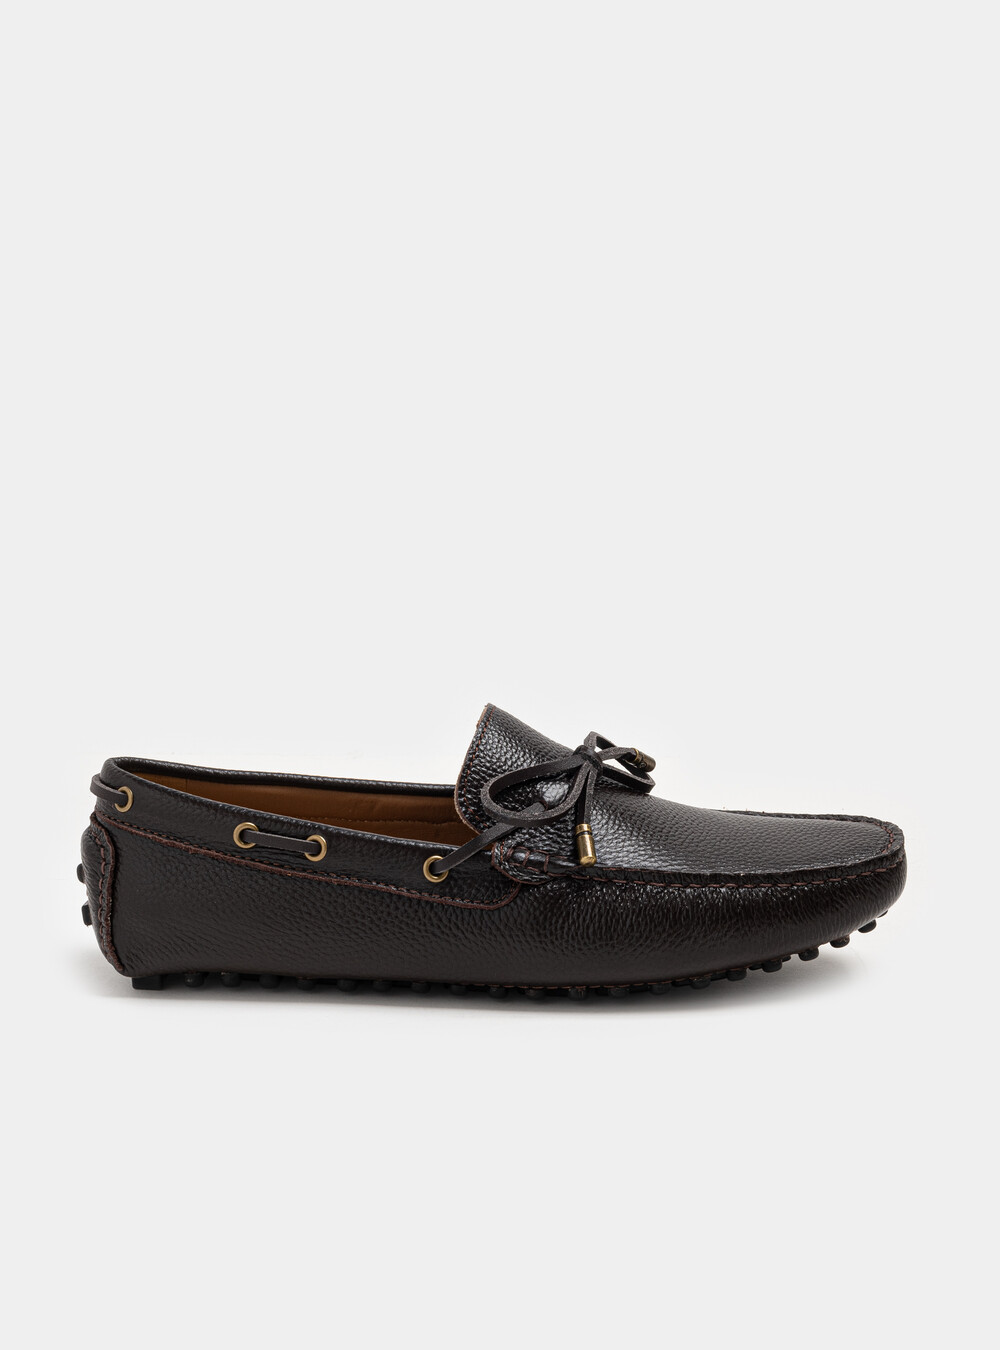 Leather boat moccasins | GutteridgeUS | Casual Shoes Uomo